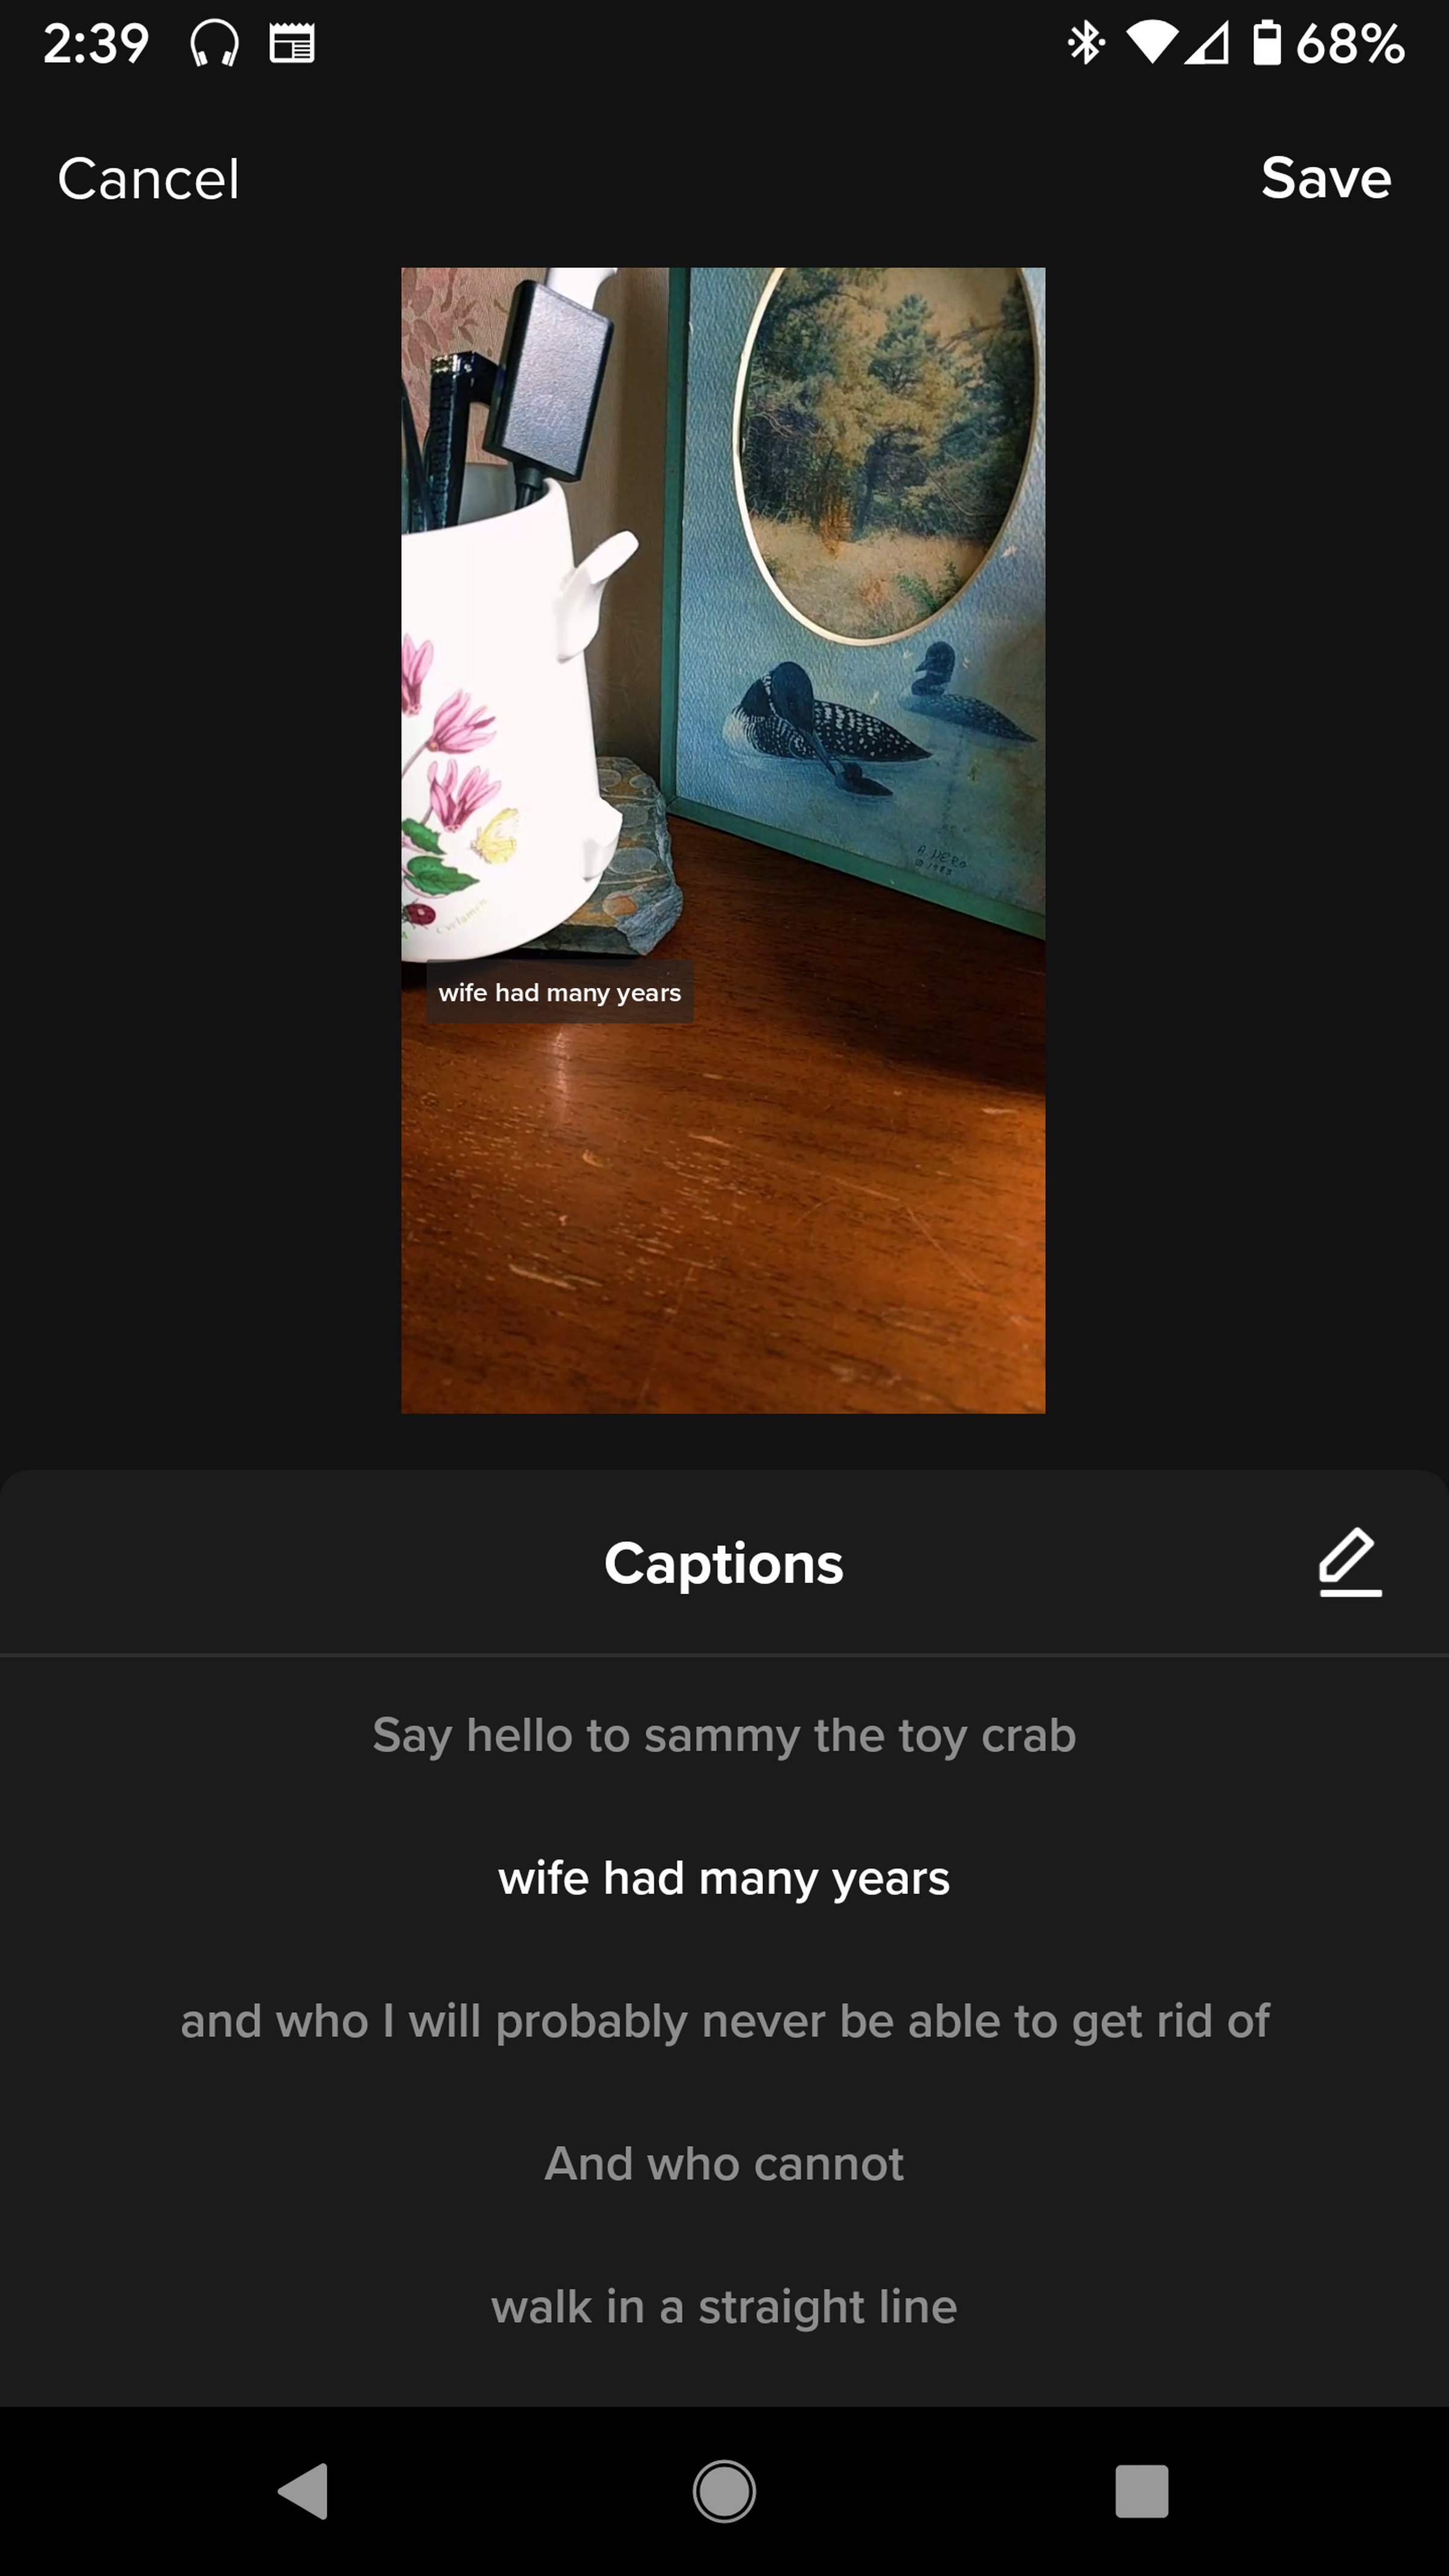 The Captions screen will show you what your captions will look like.